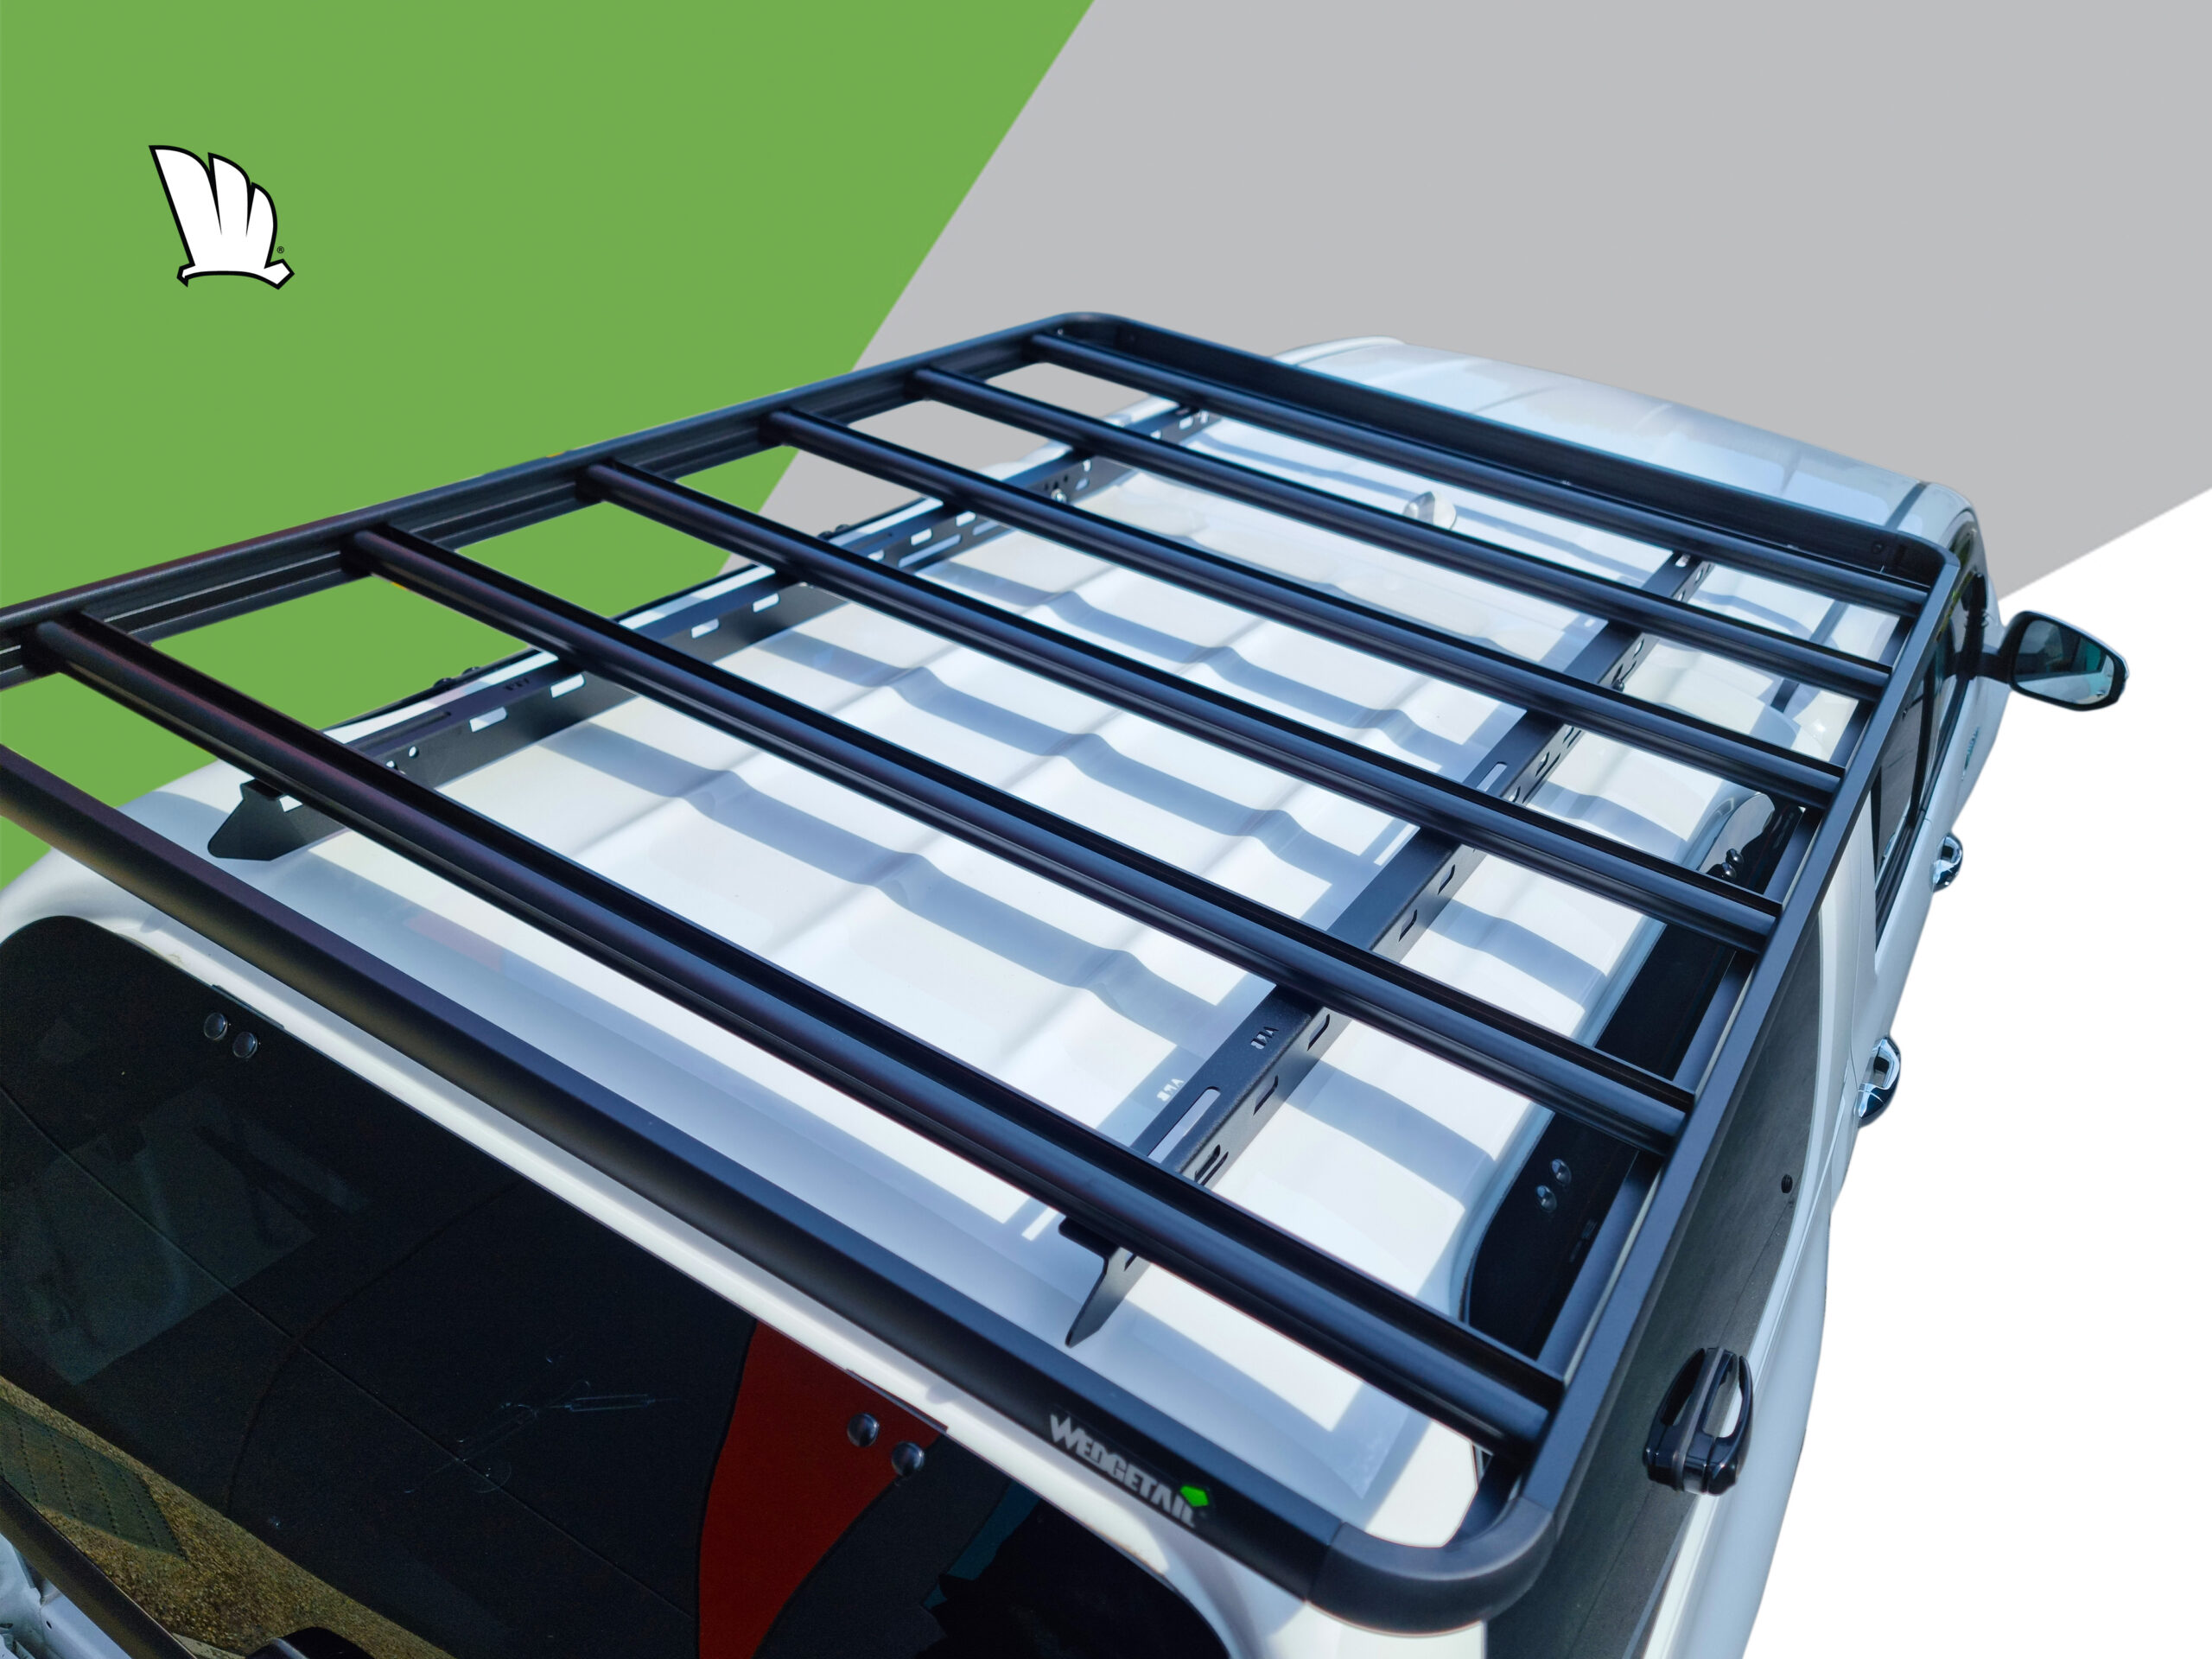 Front view of the Toyota HiLux 2020 Dual Cab with Wedgetail roof rack installed showing the platform rack with a wind deflector installed and the one piece mounting rails fixed in two places to lugs fitted to the roof sub-structure.